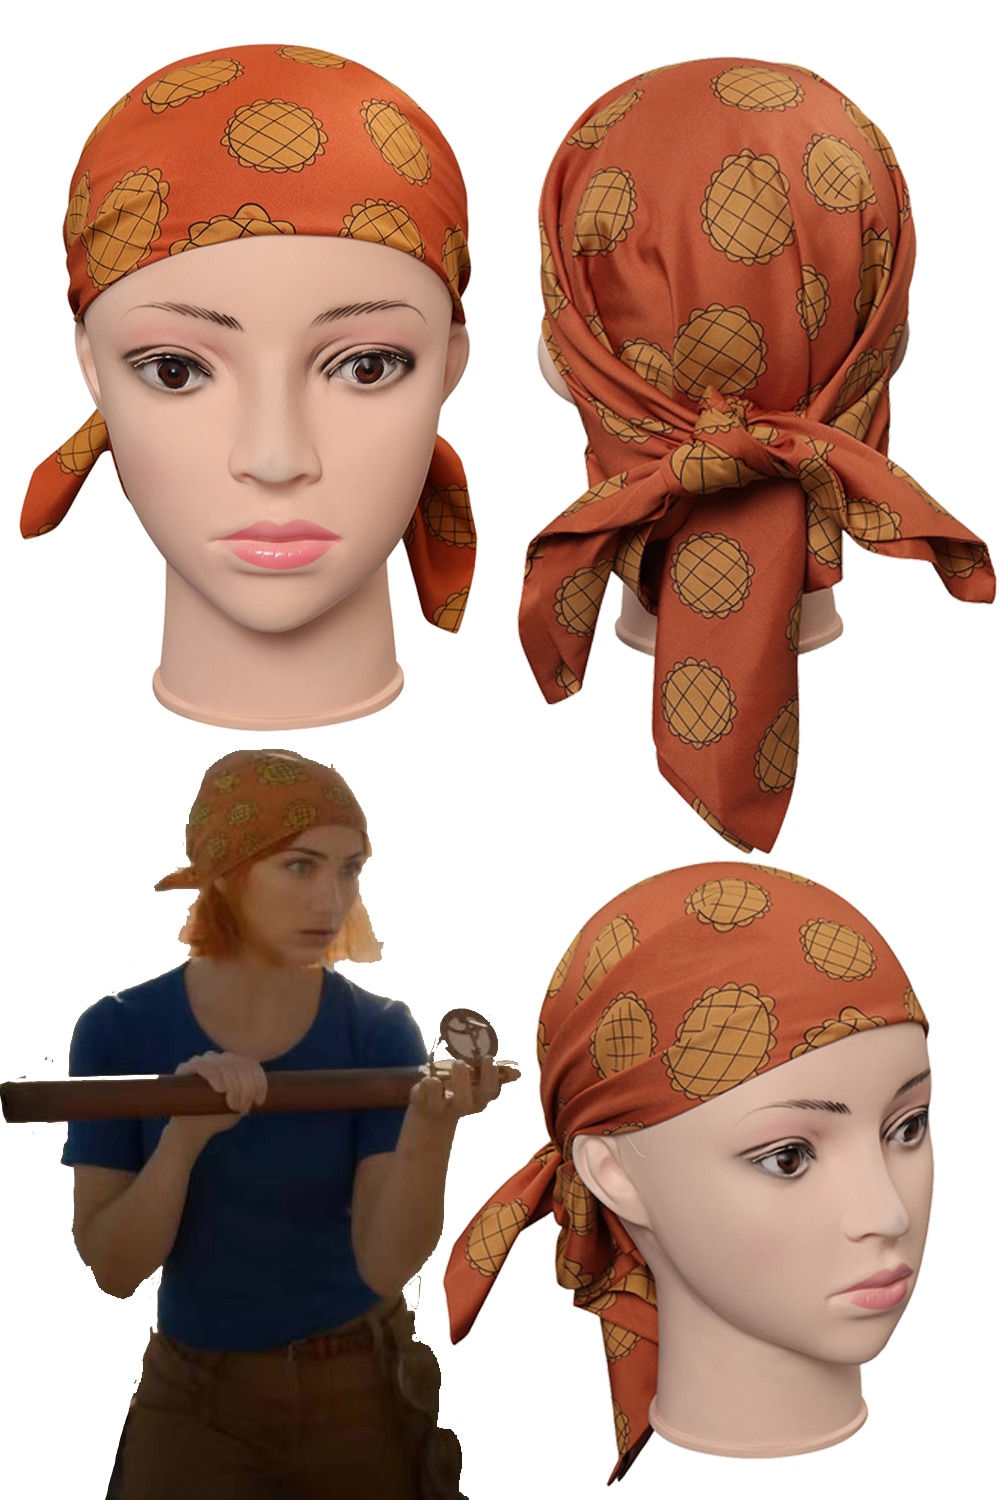 Live Action TV One Cos Piece Nami Cosplay Print Scarf Kerchief Costume Accessories Sailor Handband Halloween - One Piece Store